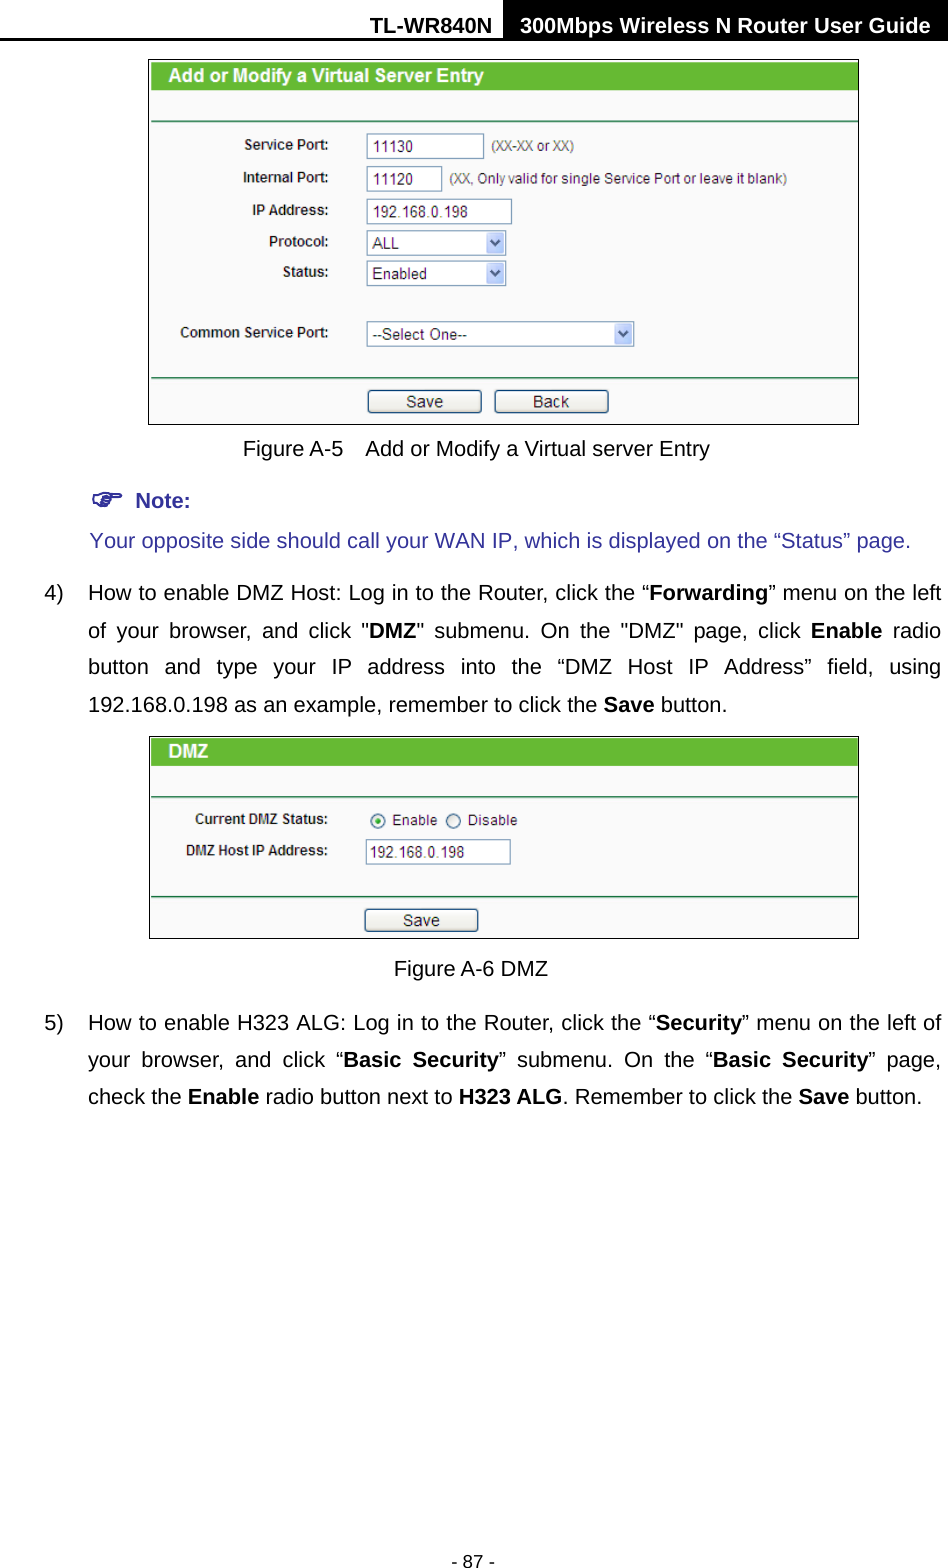 TL-WR840N 300Mbps Wireless N Router User Guide  - 87 -   Figure A-5    Add or Modify a Virtual server Entry  Note: Your opposite side should call your WAN IP, which is displayed on the “Status” page. 4) How to enable DMZ Host: Log in to the Router, click the “Forwarding” menu on the left of your browser, and click &quot;DMZ&quot; submenu. On the &quot;DMZ&quot; page, click Enable radio button and type your IP address into the “DMZ Host IP Address” field, using 192.168.0.198 as an example, remember to click the Save button.    Figure A-6 DMZ 5) How to enable H323 ALG: Log in to the Router, click the “Security” menu on the left of your browser, and click “Basic Security”  submenu.  On the “Basic Security”  page, check the Enable radio button next to H323 ALG. Remember to click the Save button. 